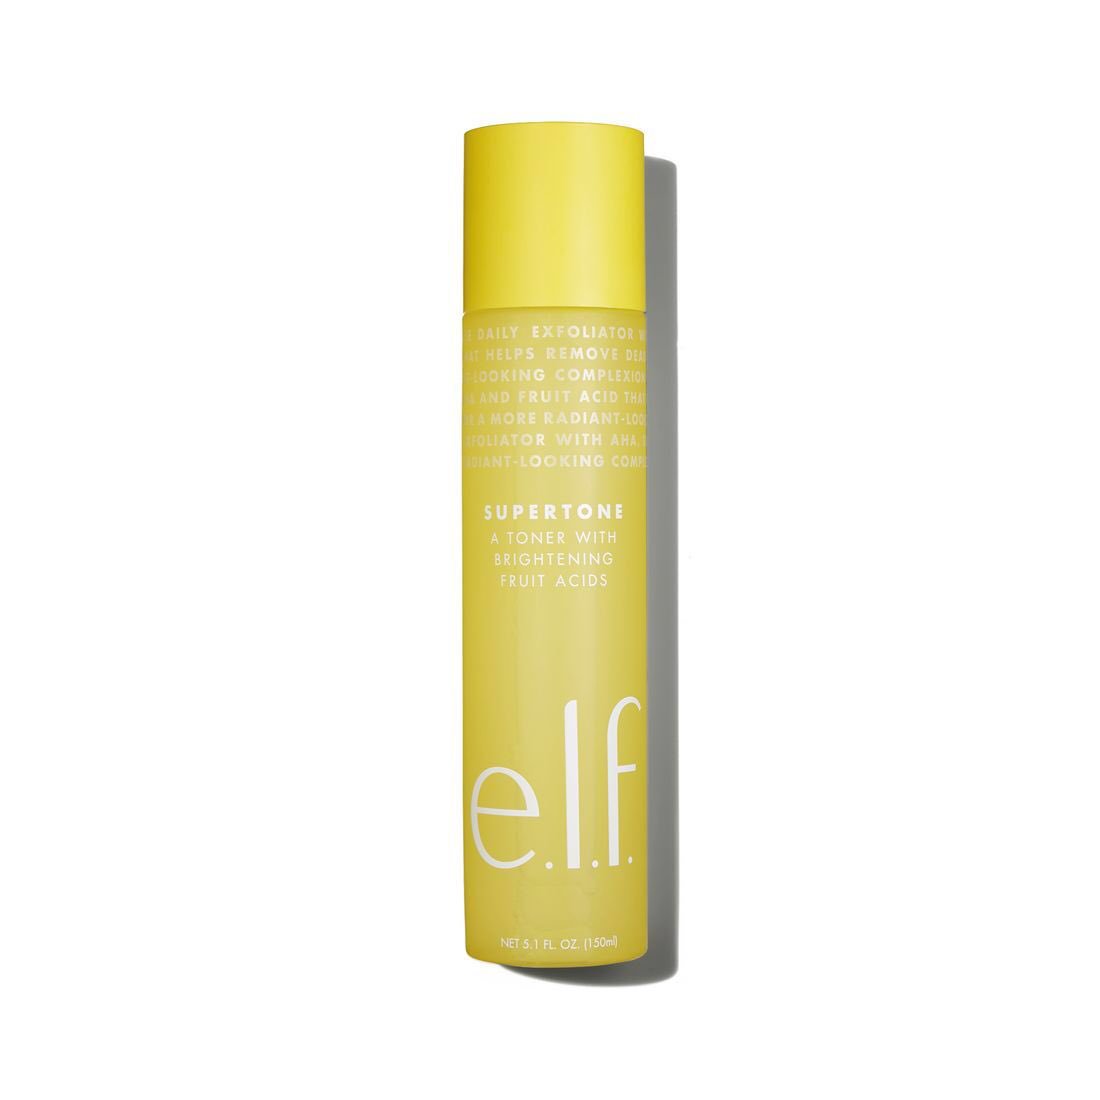 Treatments & exfoliants: There aren’t many good chemical exfoliants @ the drugstore (outside of the ordinary) but Elf makes a great chemical exfoliant that has glycolic & sodium pca that helps hydrate & exfoliate. Differin is great for acne prone skin